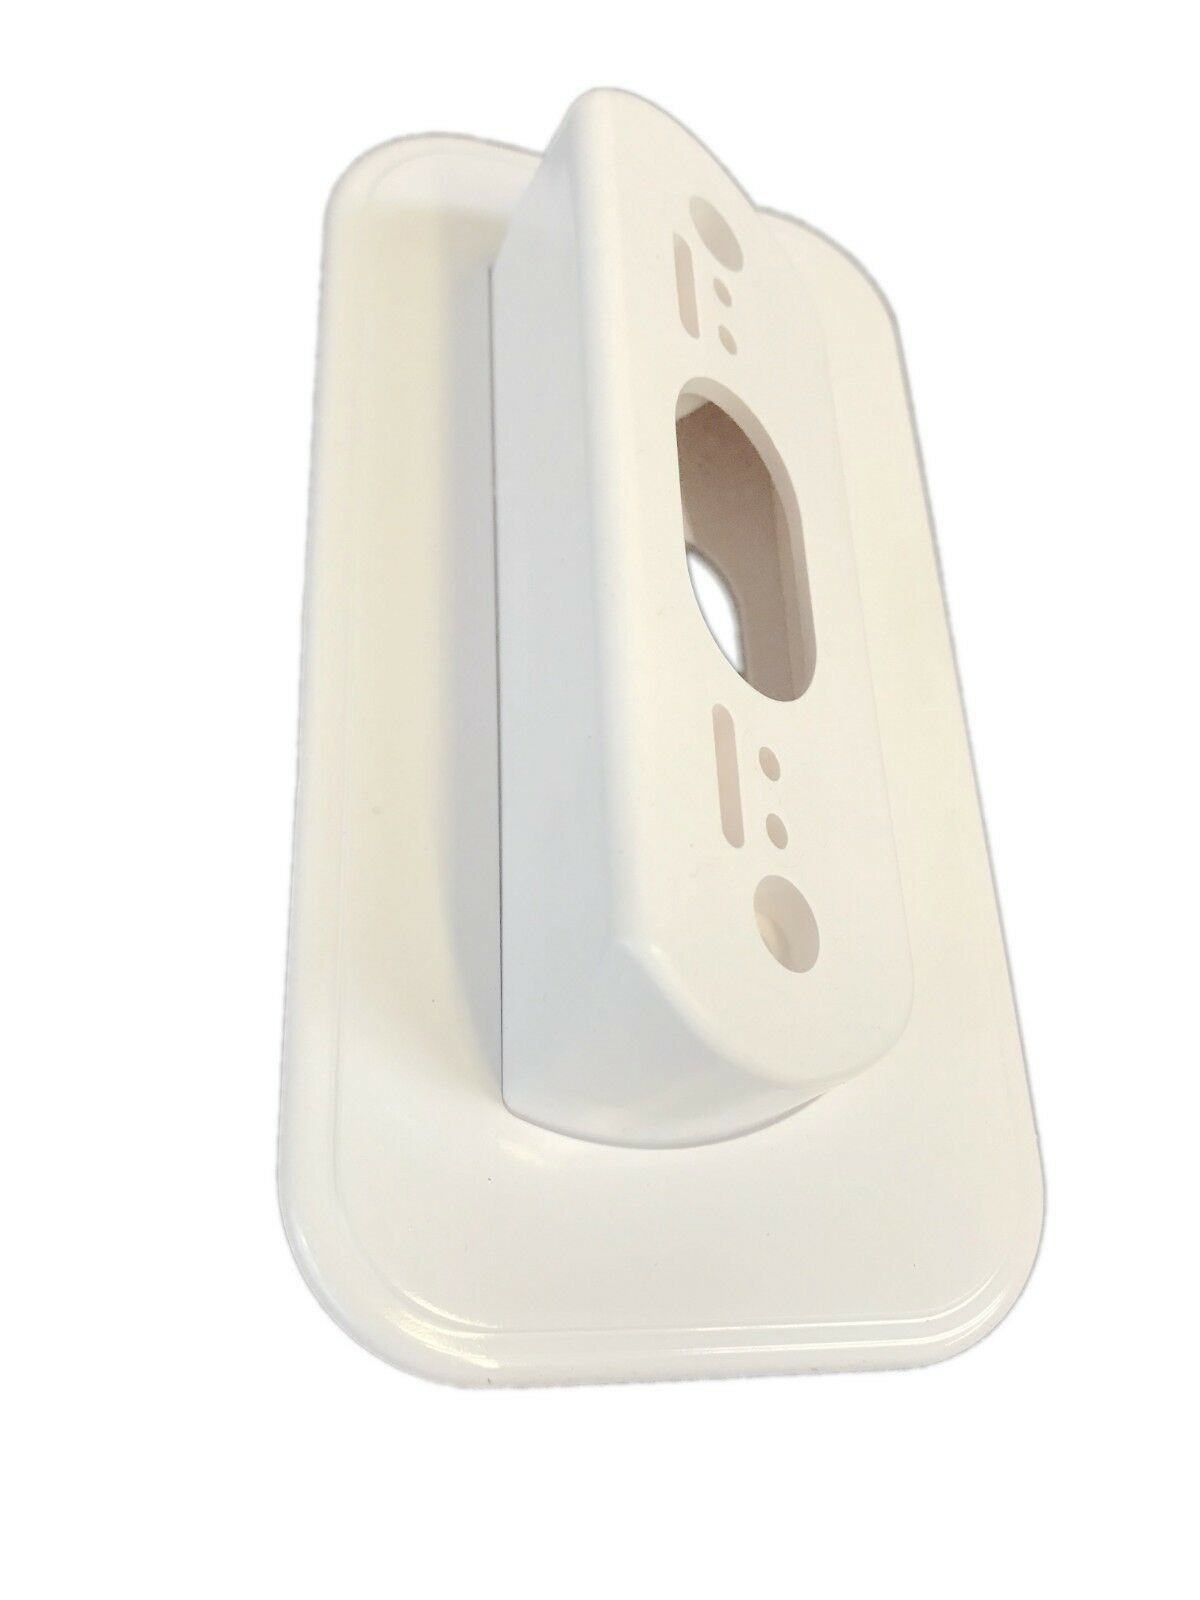 WHITE! Wall Plate with 30 Degree L/R Wedge Angle Mount for Nest Hello Doorbell